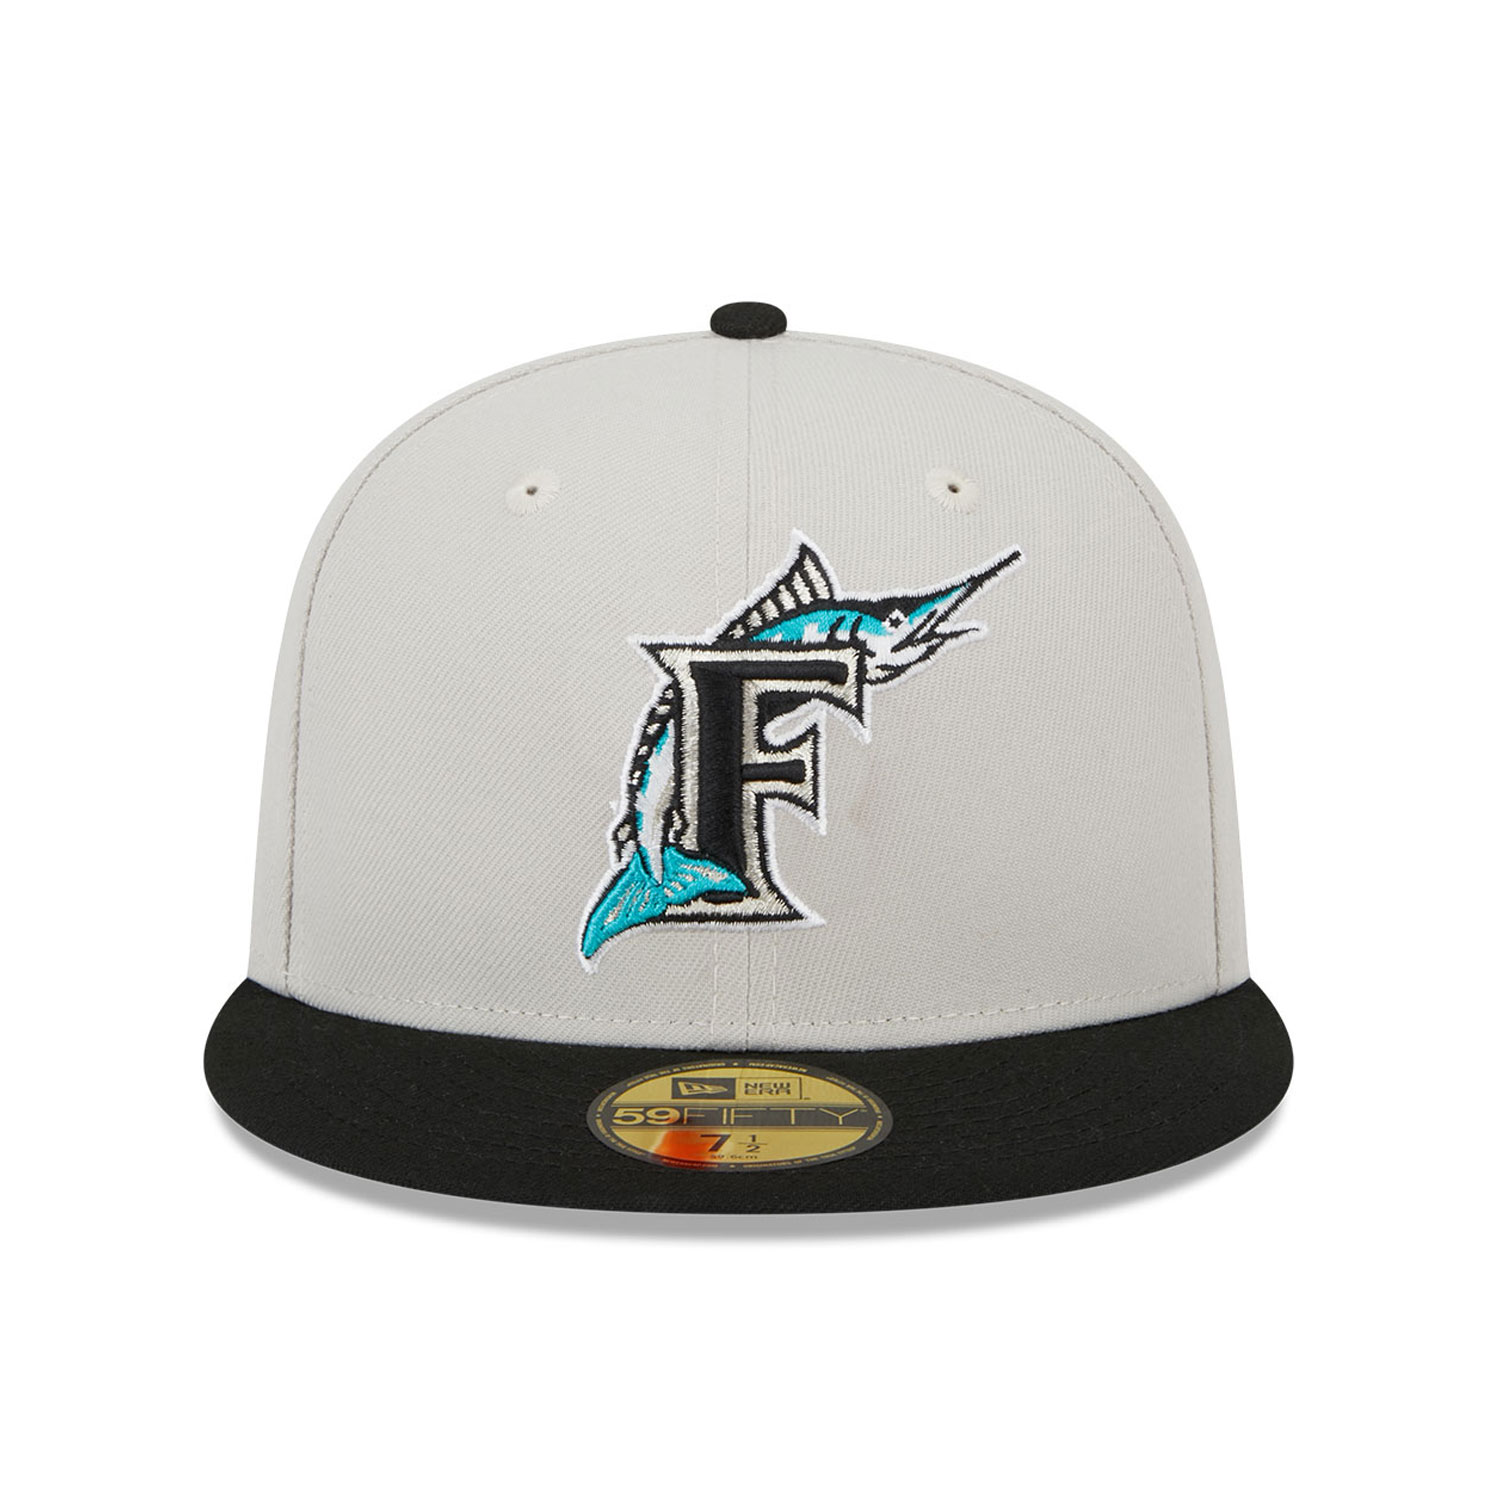 Official New Era Varsity Letter Miami Marlins 59FIFTY Fitted Cap C125_226  C125_226